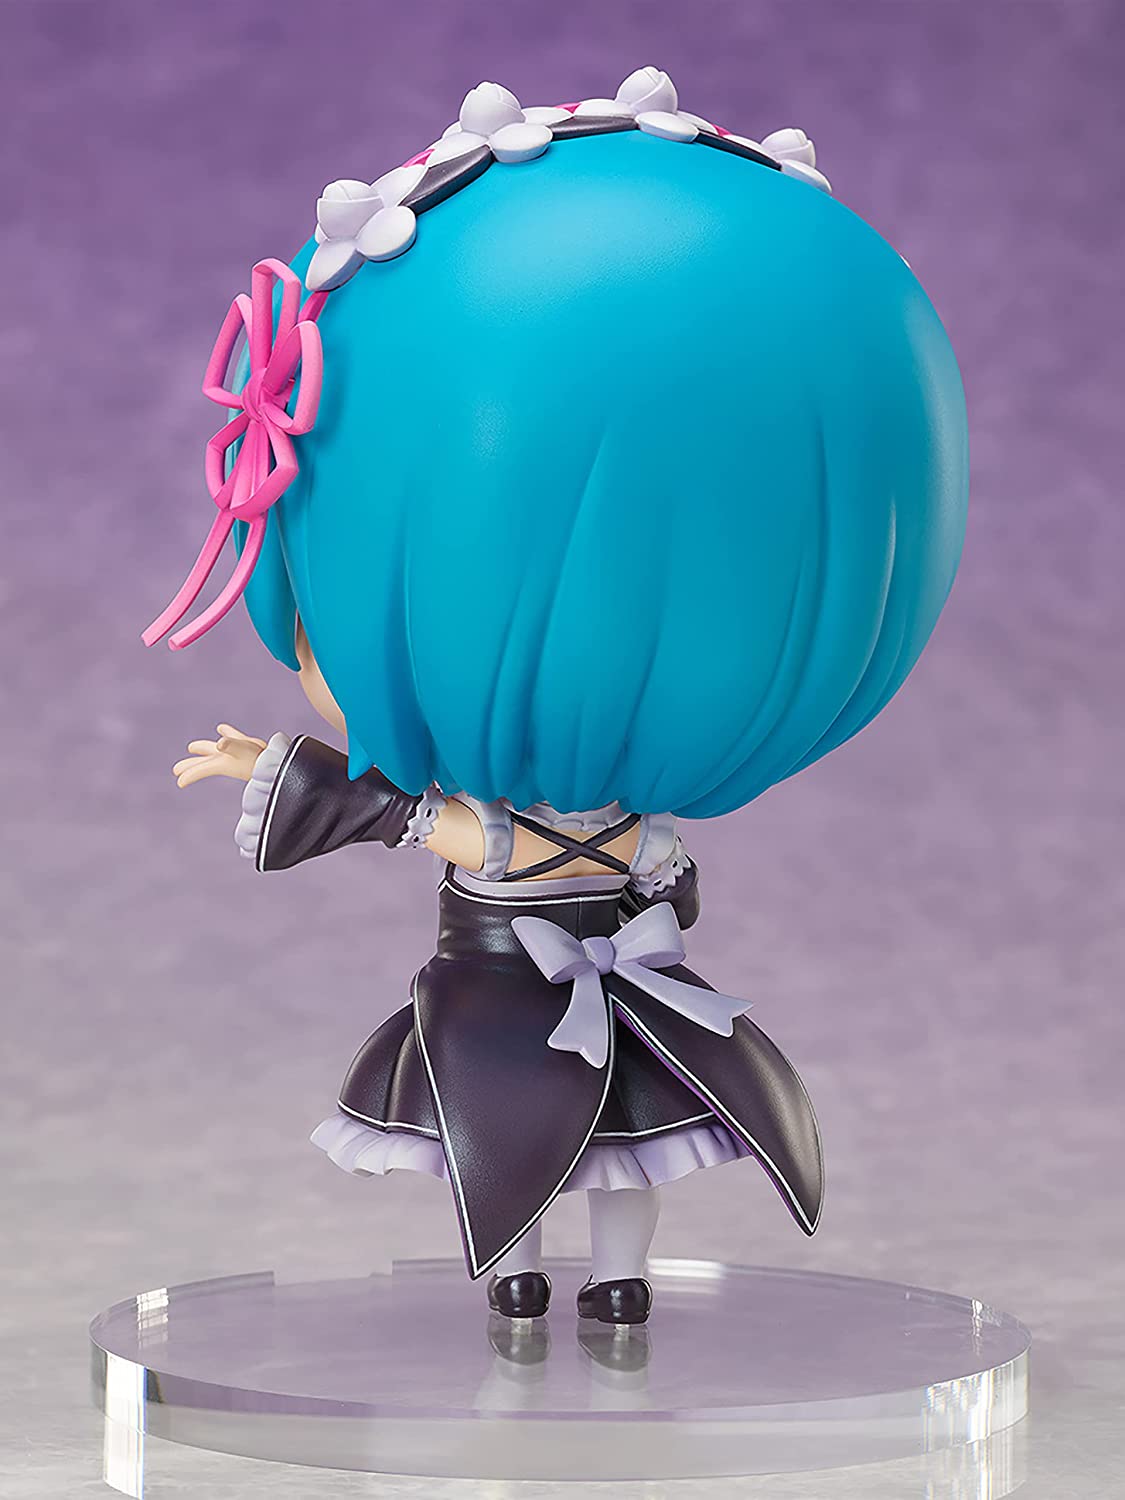 Chouaiderukei Series PREMIUM BIG Re:ZERO -Starting Life in Another World- Rem Coming Out to Meet You Ver. Artistic Coloring Finish Figure | animota